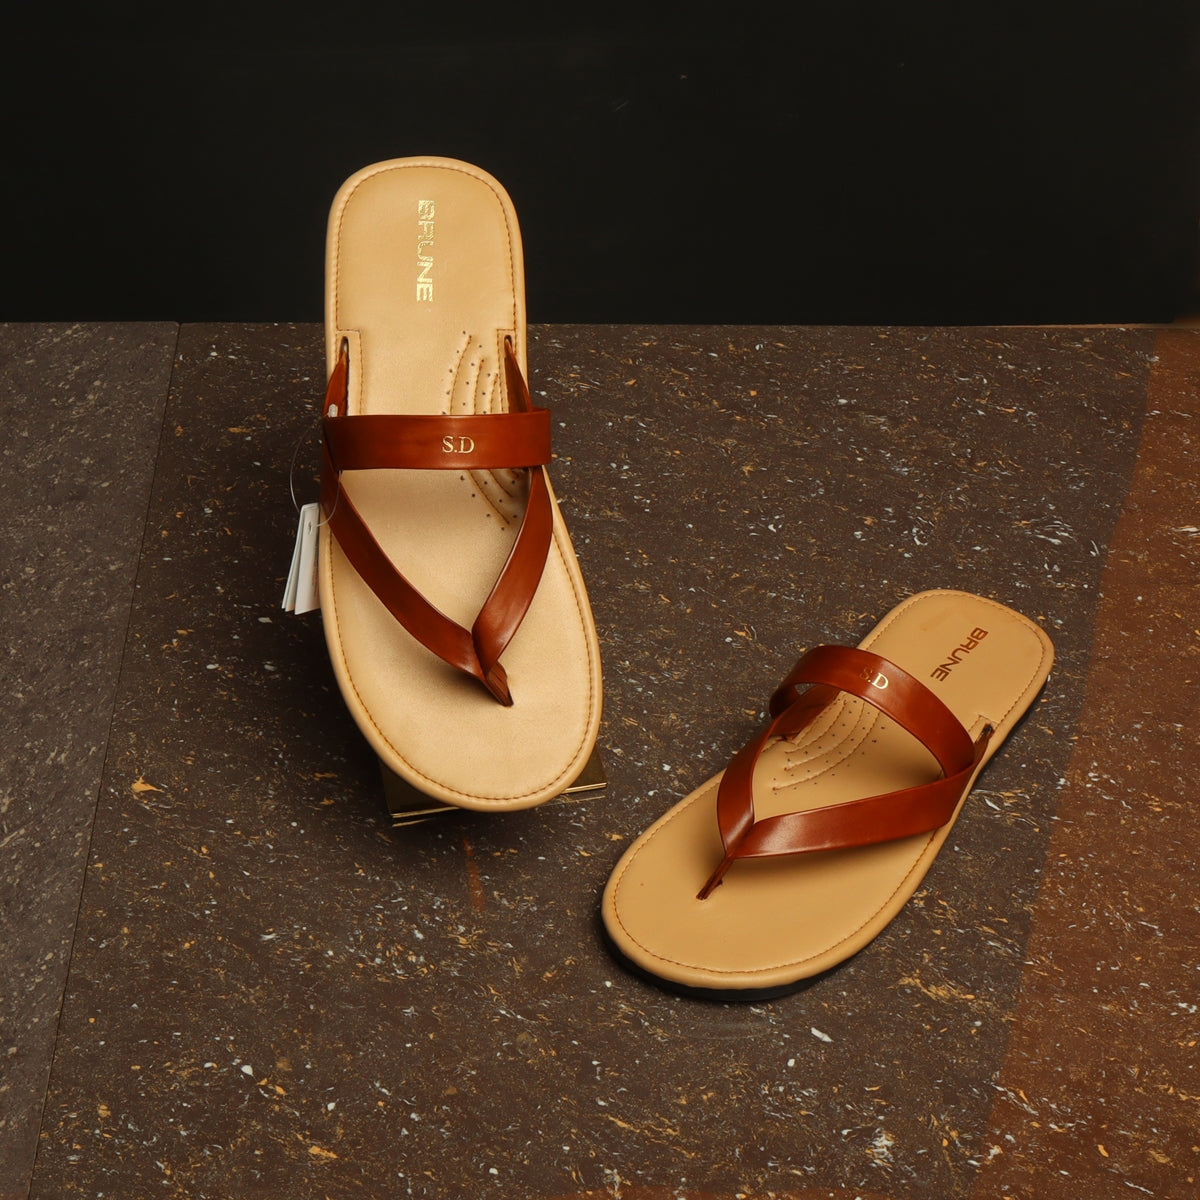 Bespoke Women's Tan Beige Knotted V-Strap Customized Slippers with Name Initial By Brune & Bareskin